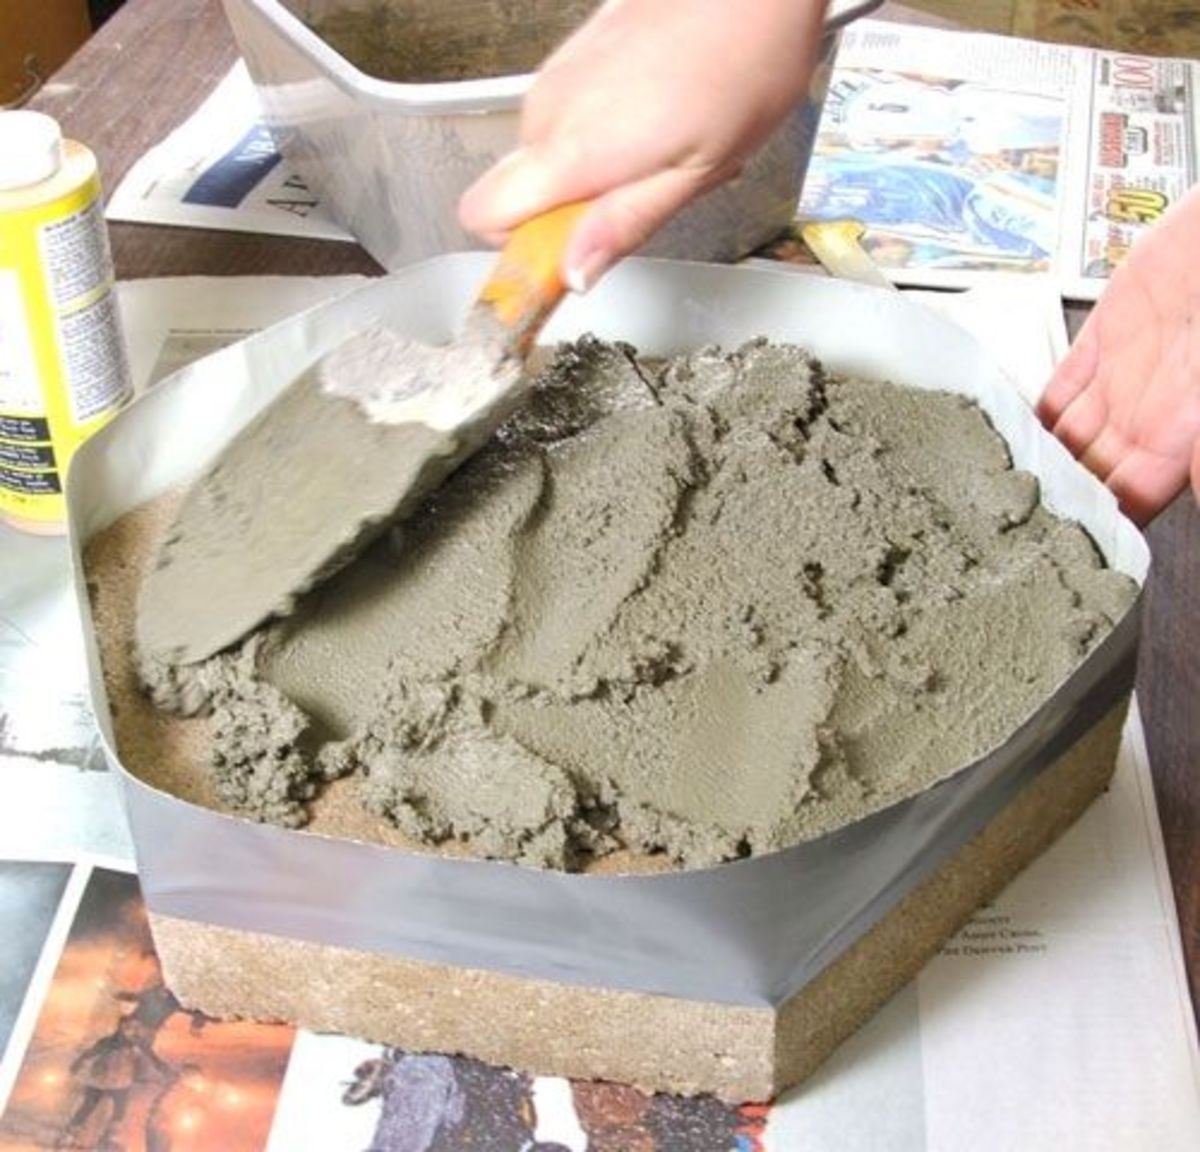 Step 6. Scoop the mortar onto your stone using your trowel. Using the back of your trowel spread the wet mortar evenly across the base stone and as level as possible. With the edge of your trowel smooth the surface. The total time you spend on mixing